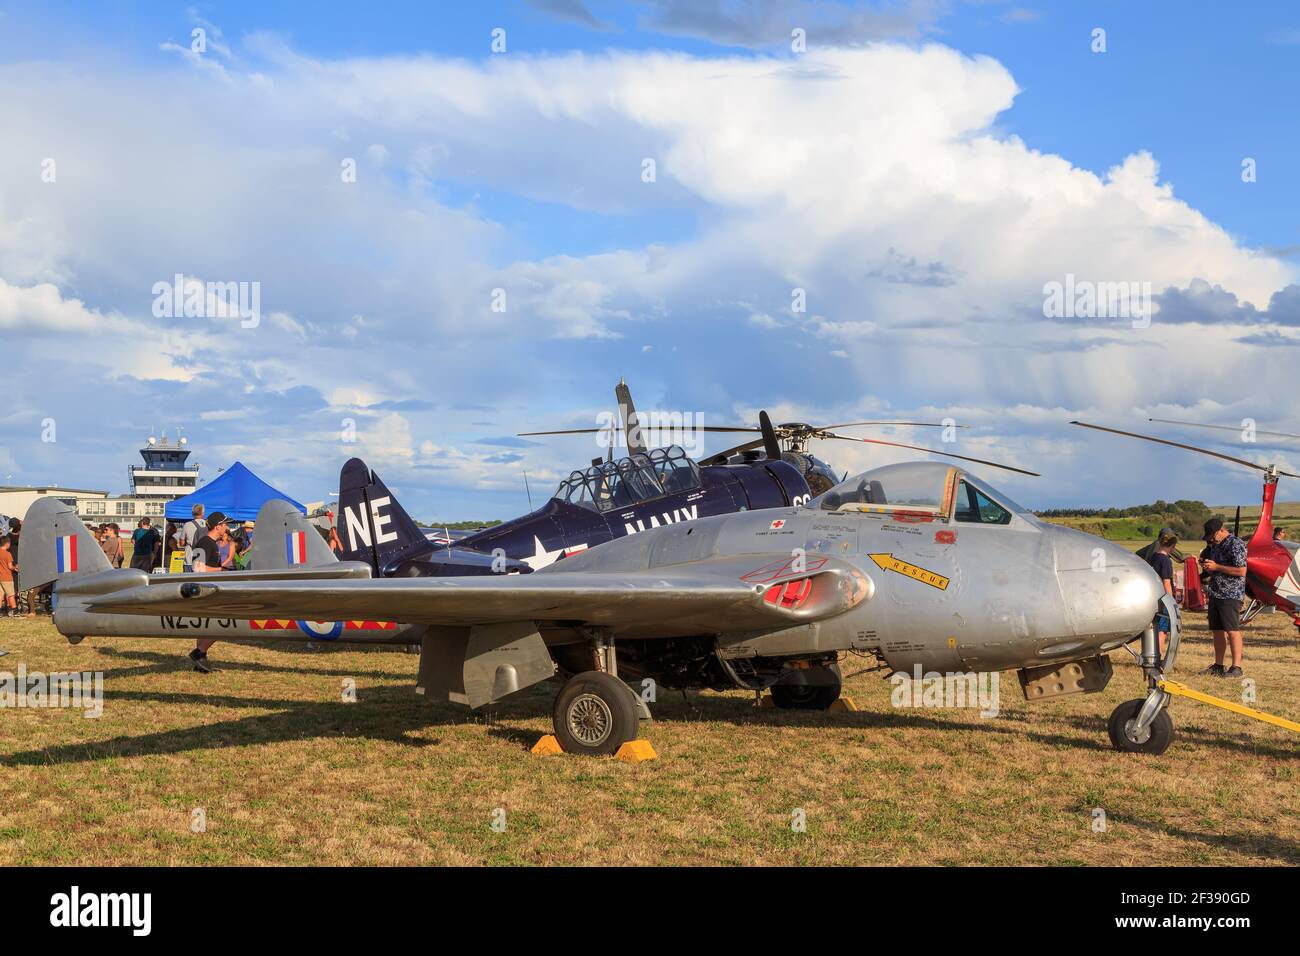 A de Havilland DH115 Vampire, a British jet fighter of the 1940s, on display at an air show Stock Photo